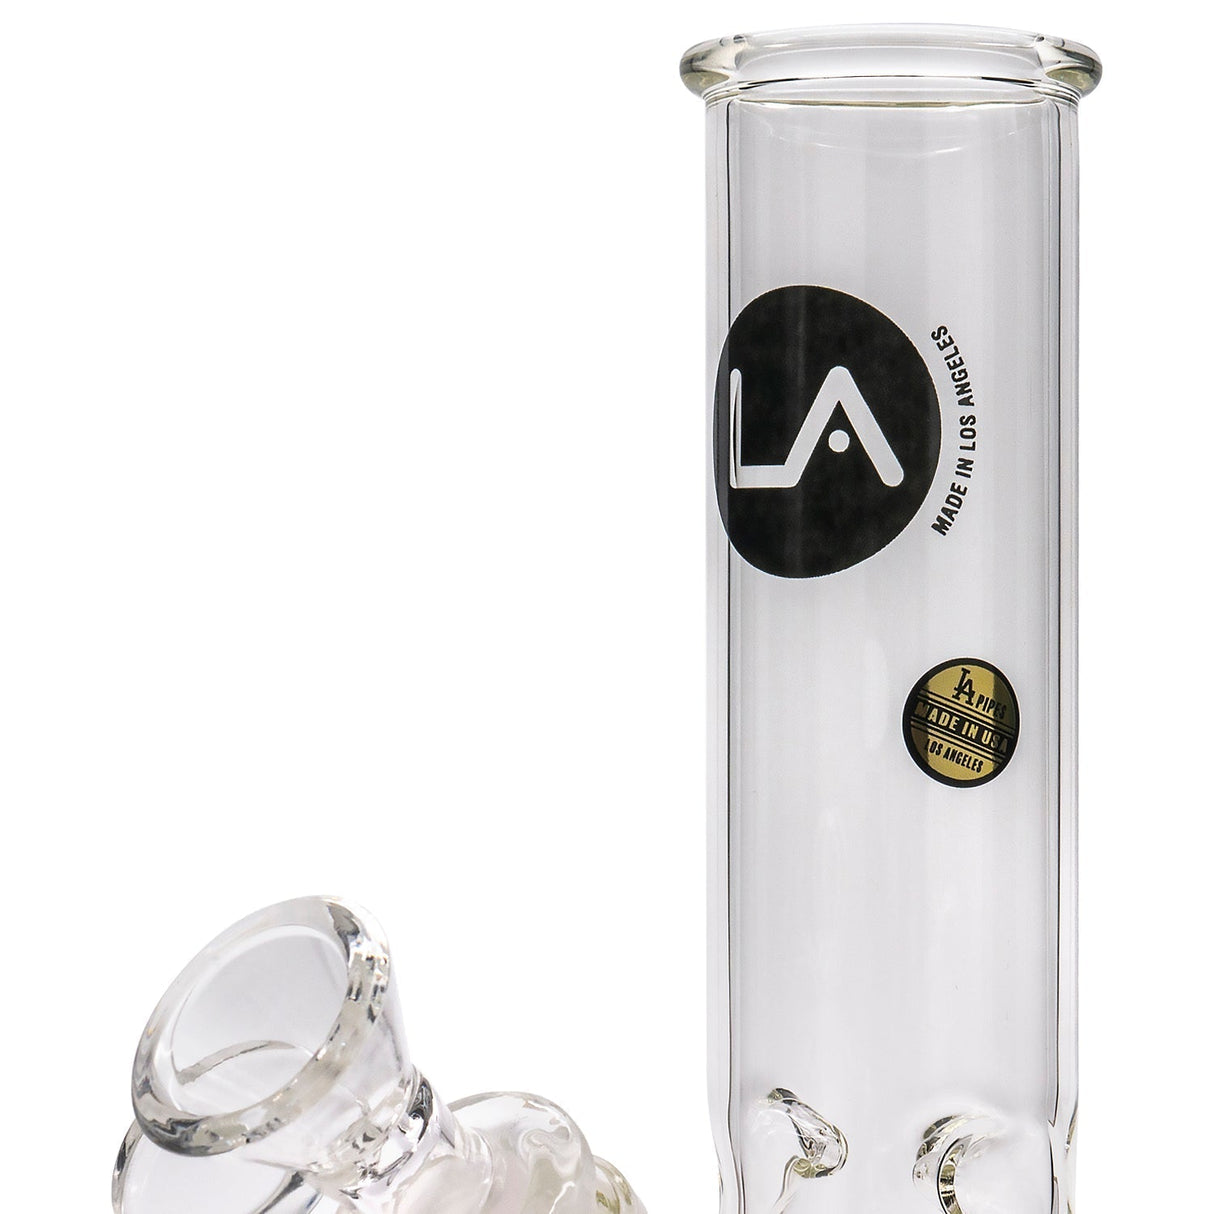 LA Pipes Donut Base Bong close-up, clear borosilicate glass with logo, 8" height, 45-degree joint